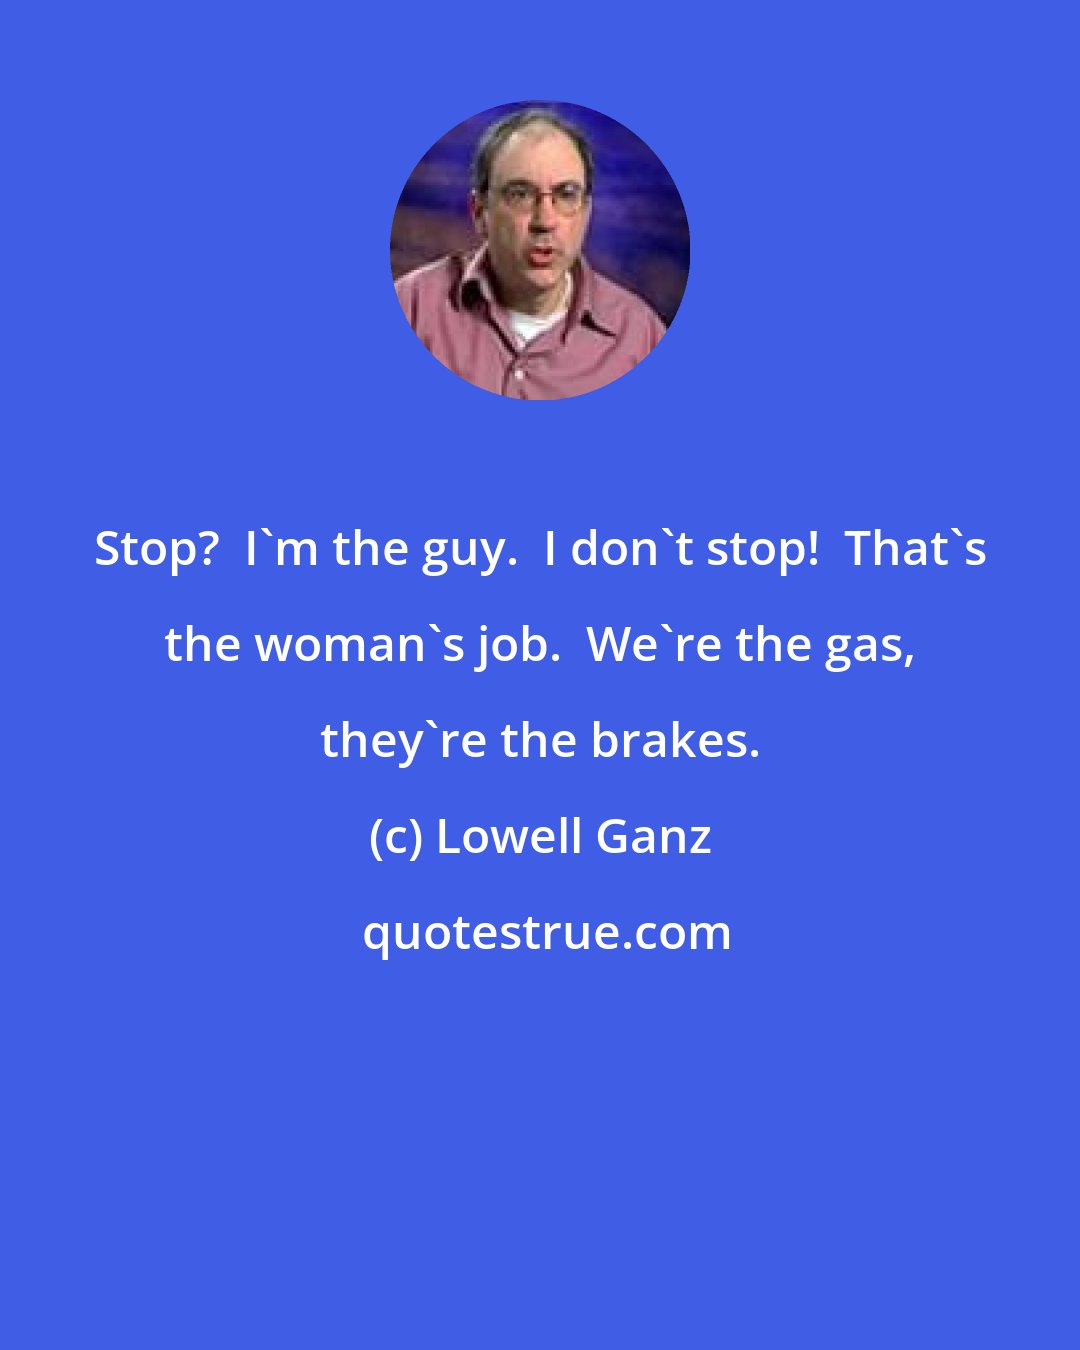 Lowell Ganz: Stop?  I'm the guy.  I don't stop!  That's the woman's job.  We're the gas, they're the brakes.